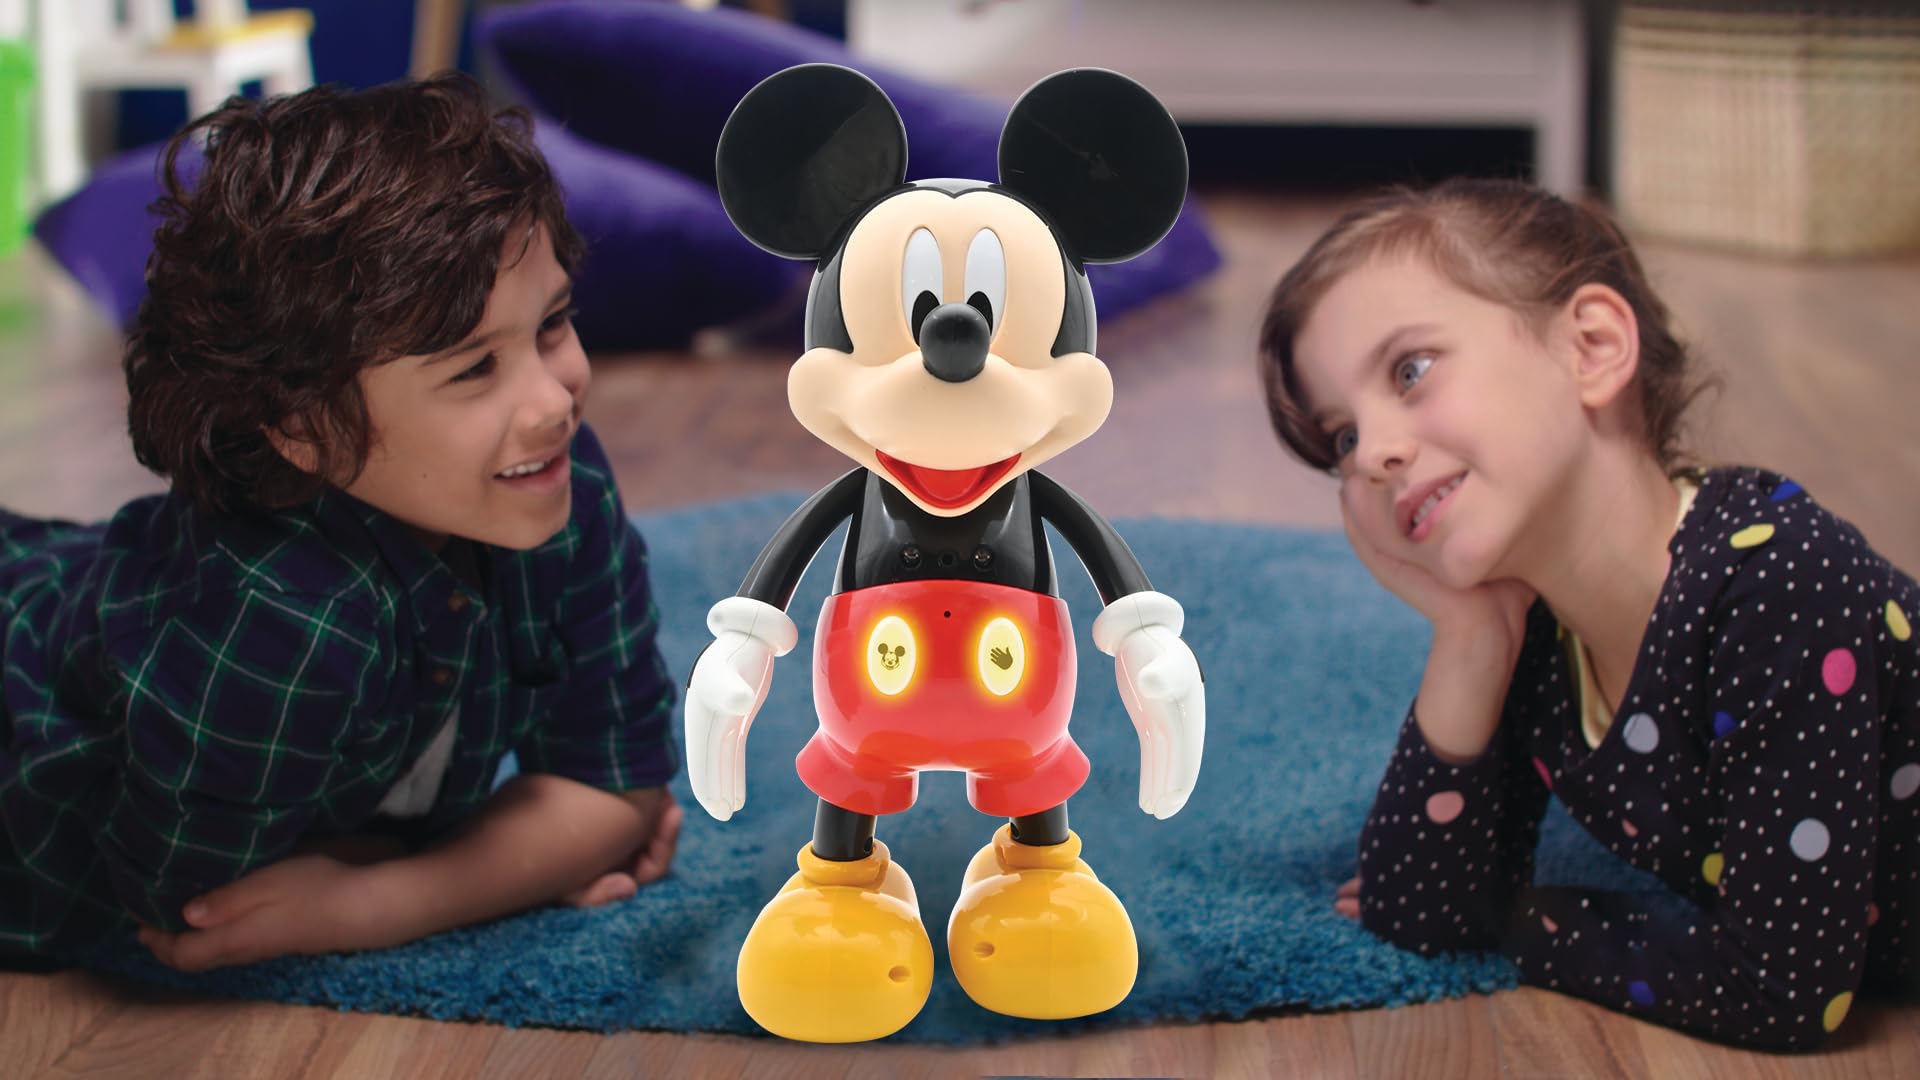 LEXiBOOK - Disney - Bilingual Mickey Robot - English/Spanish, 100 Educational quizzes, Light Effects, Dance, programmable, Articulated, Black/red - MCH01i2